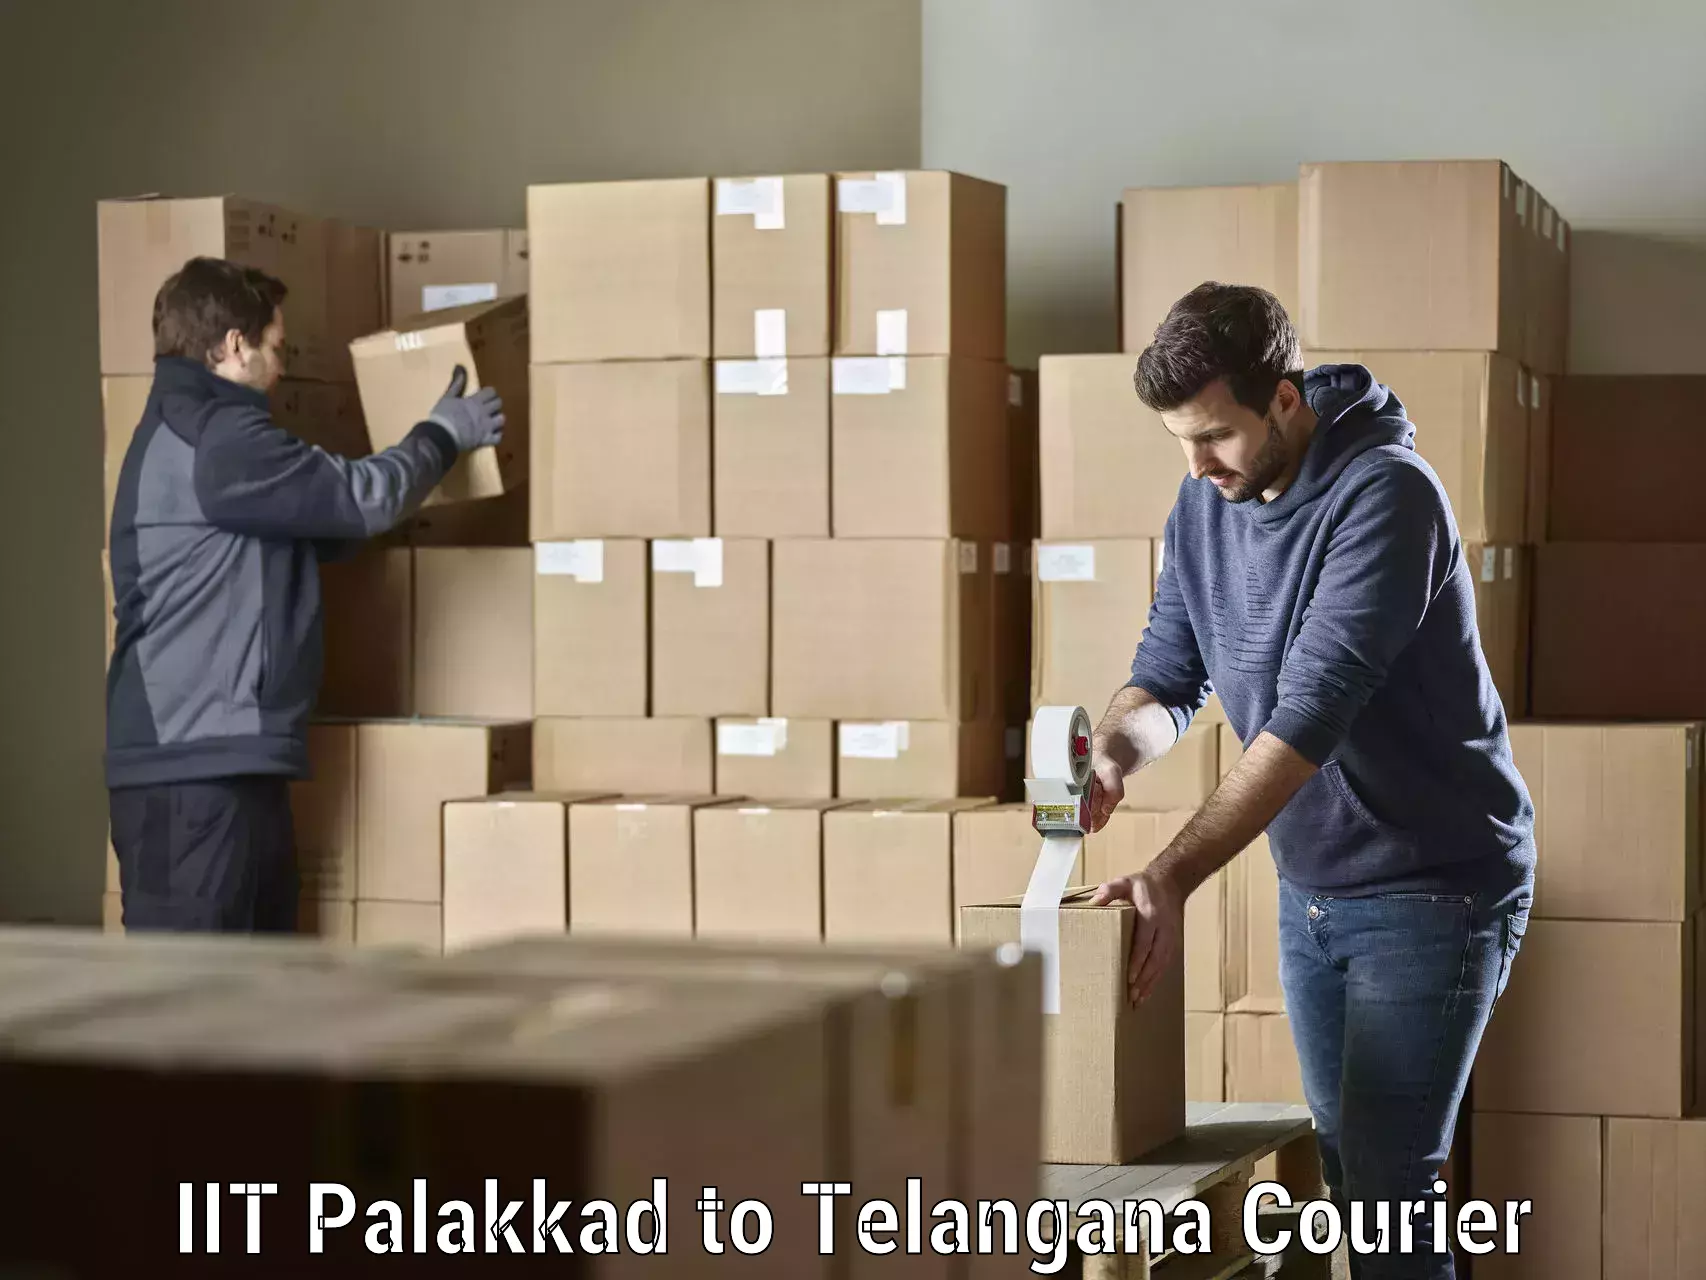 Cash on delivery service IIT Palakkad to Tadoor